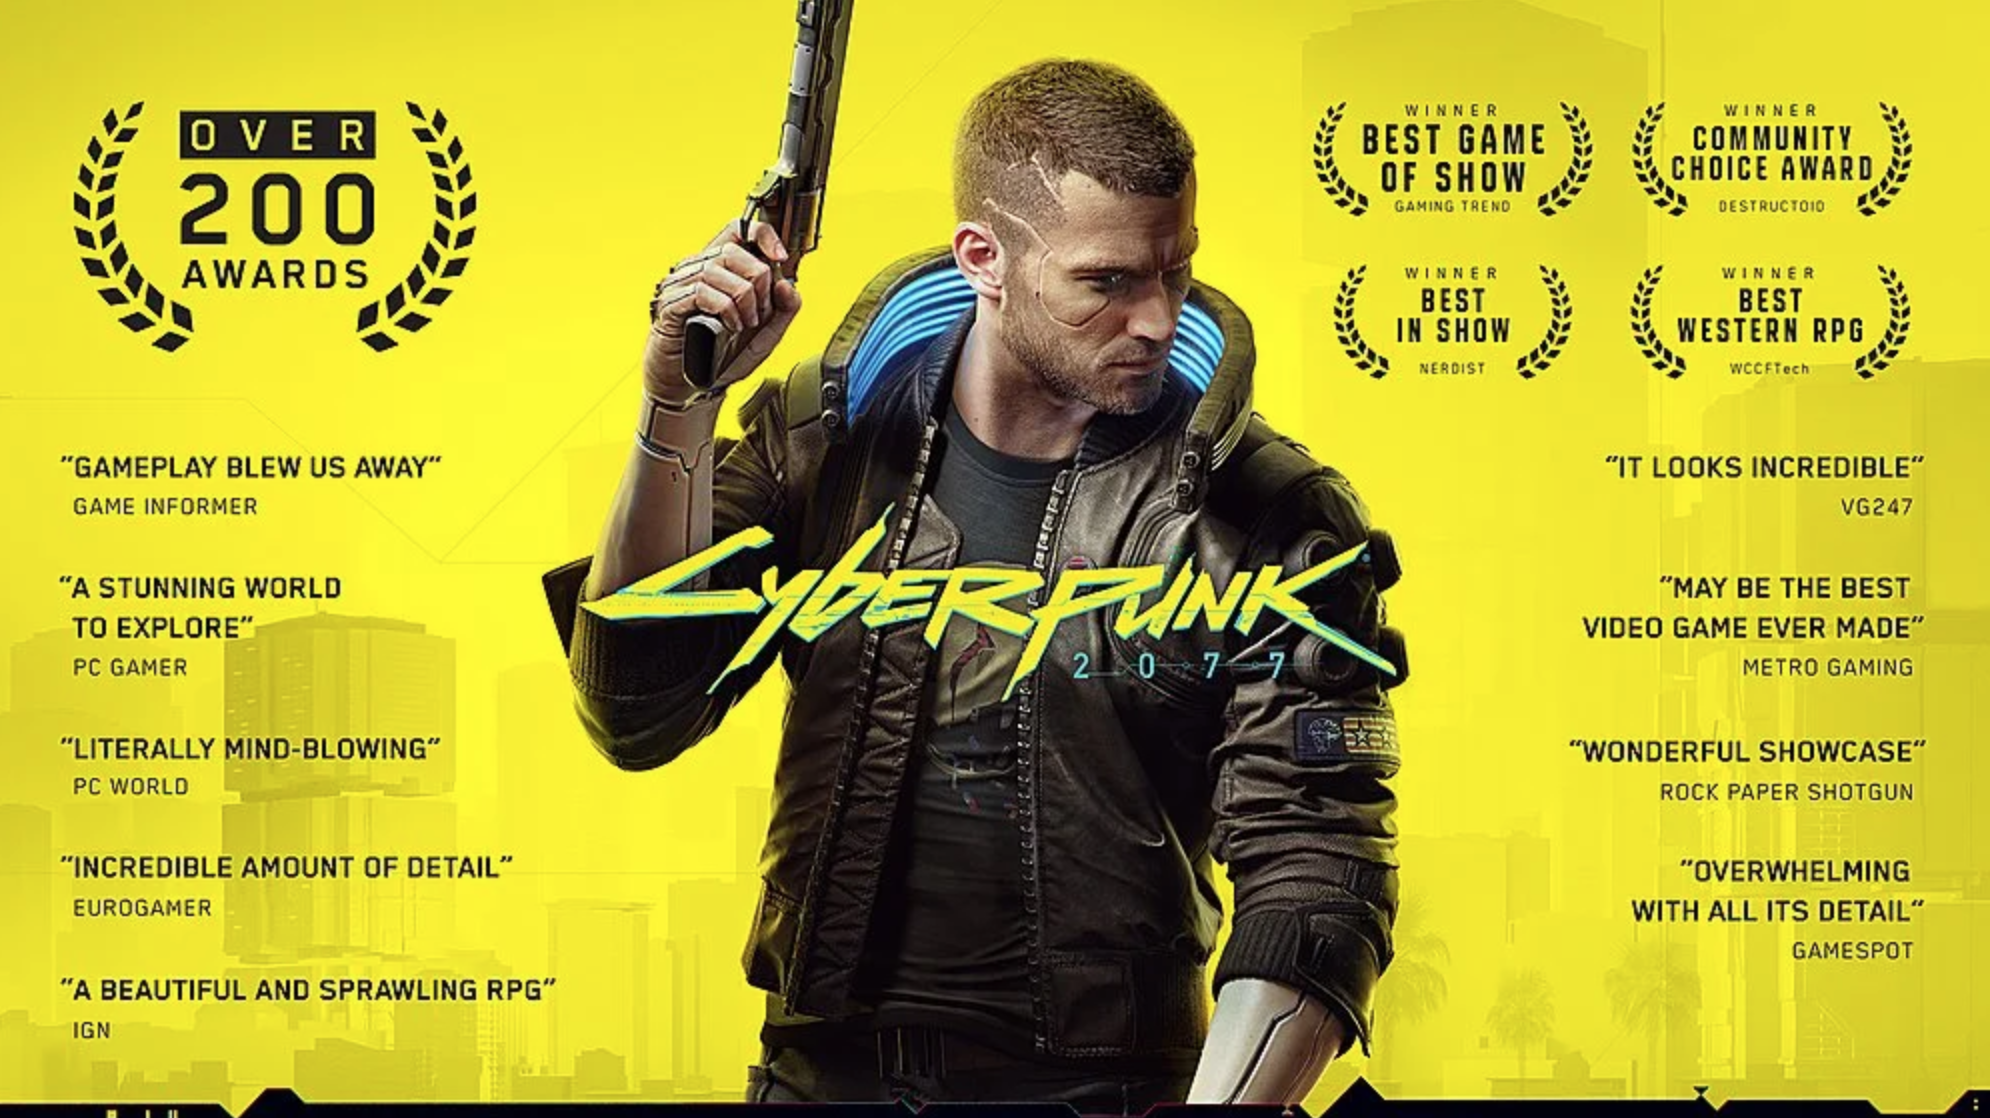 funny gaming memes - cyberpunk 2077 awards - Winner Best Game Of Show Community Choice Award Over 200 Awards Lash Estruct Ner Best In Show Winner Best Western Rpg w "Gameplay Blew Us Away" Game Informer "It Looks Incredible" V6247 A Stunning World To Expl